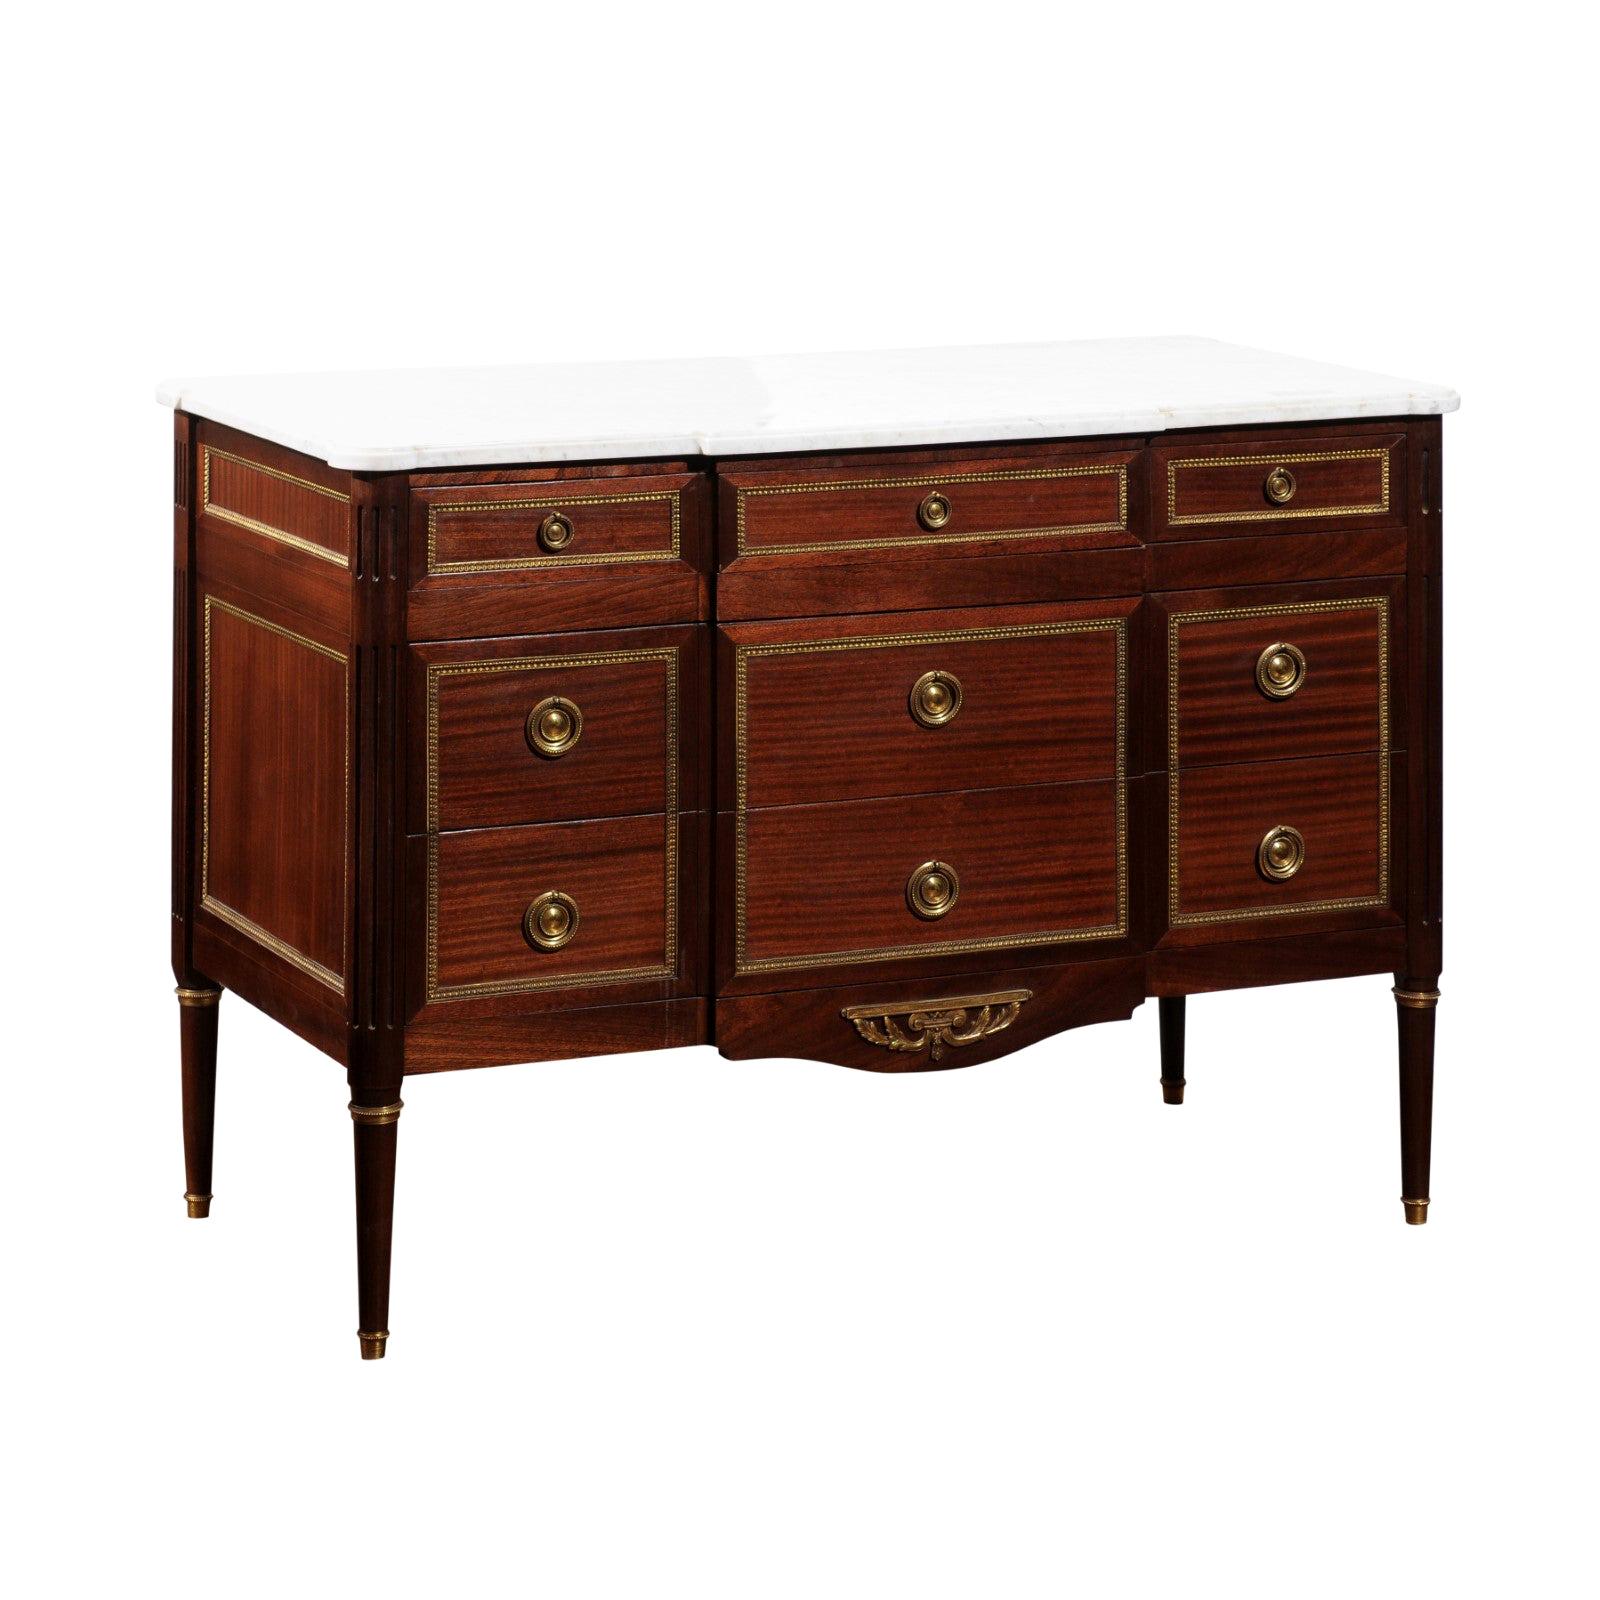 French Louis XVI Style Breakfront Commode with White Marble Top and Gilt Motifs